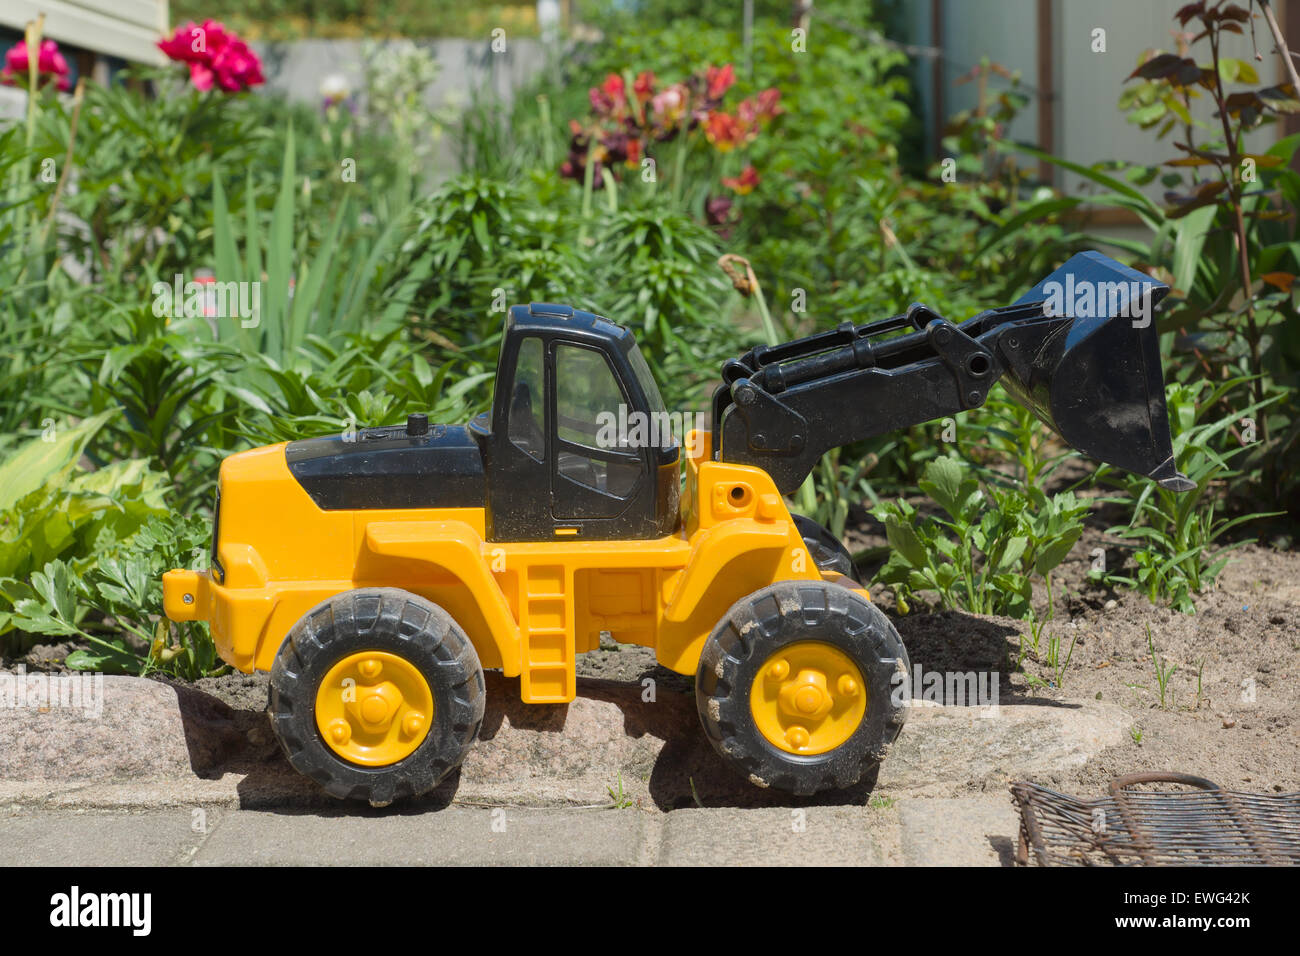 the plastic toy car costs against a bright flower bed Stock Photo